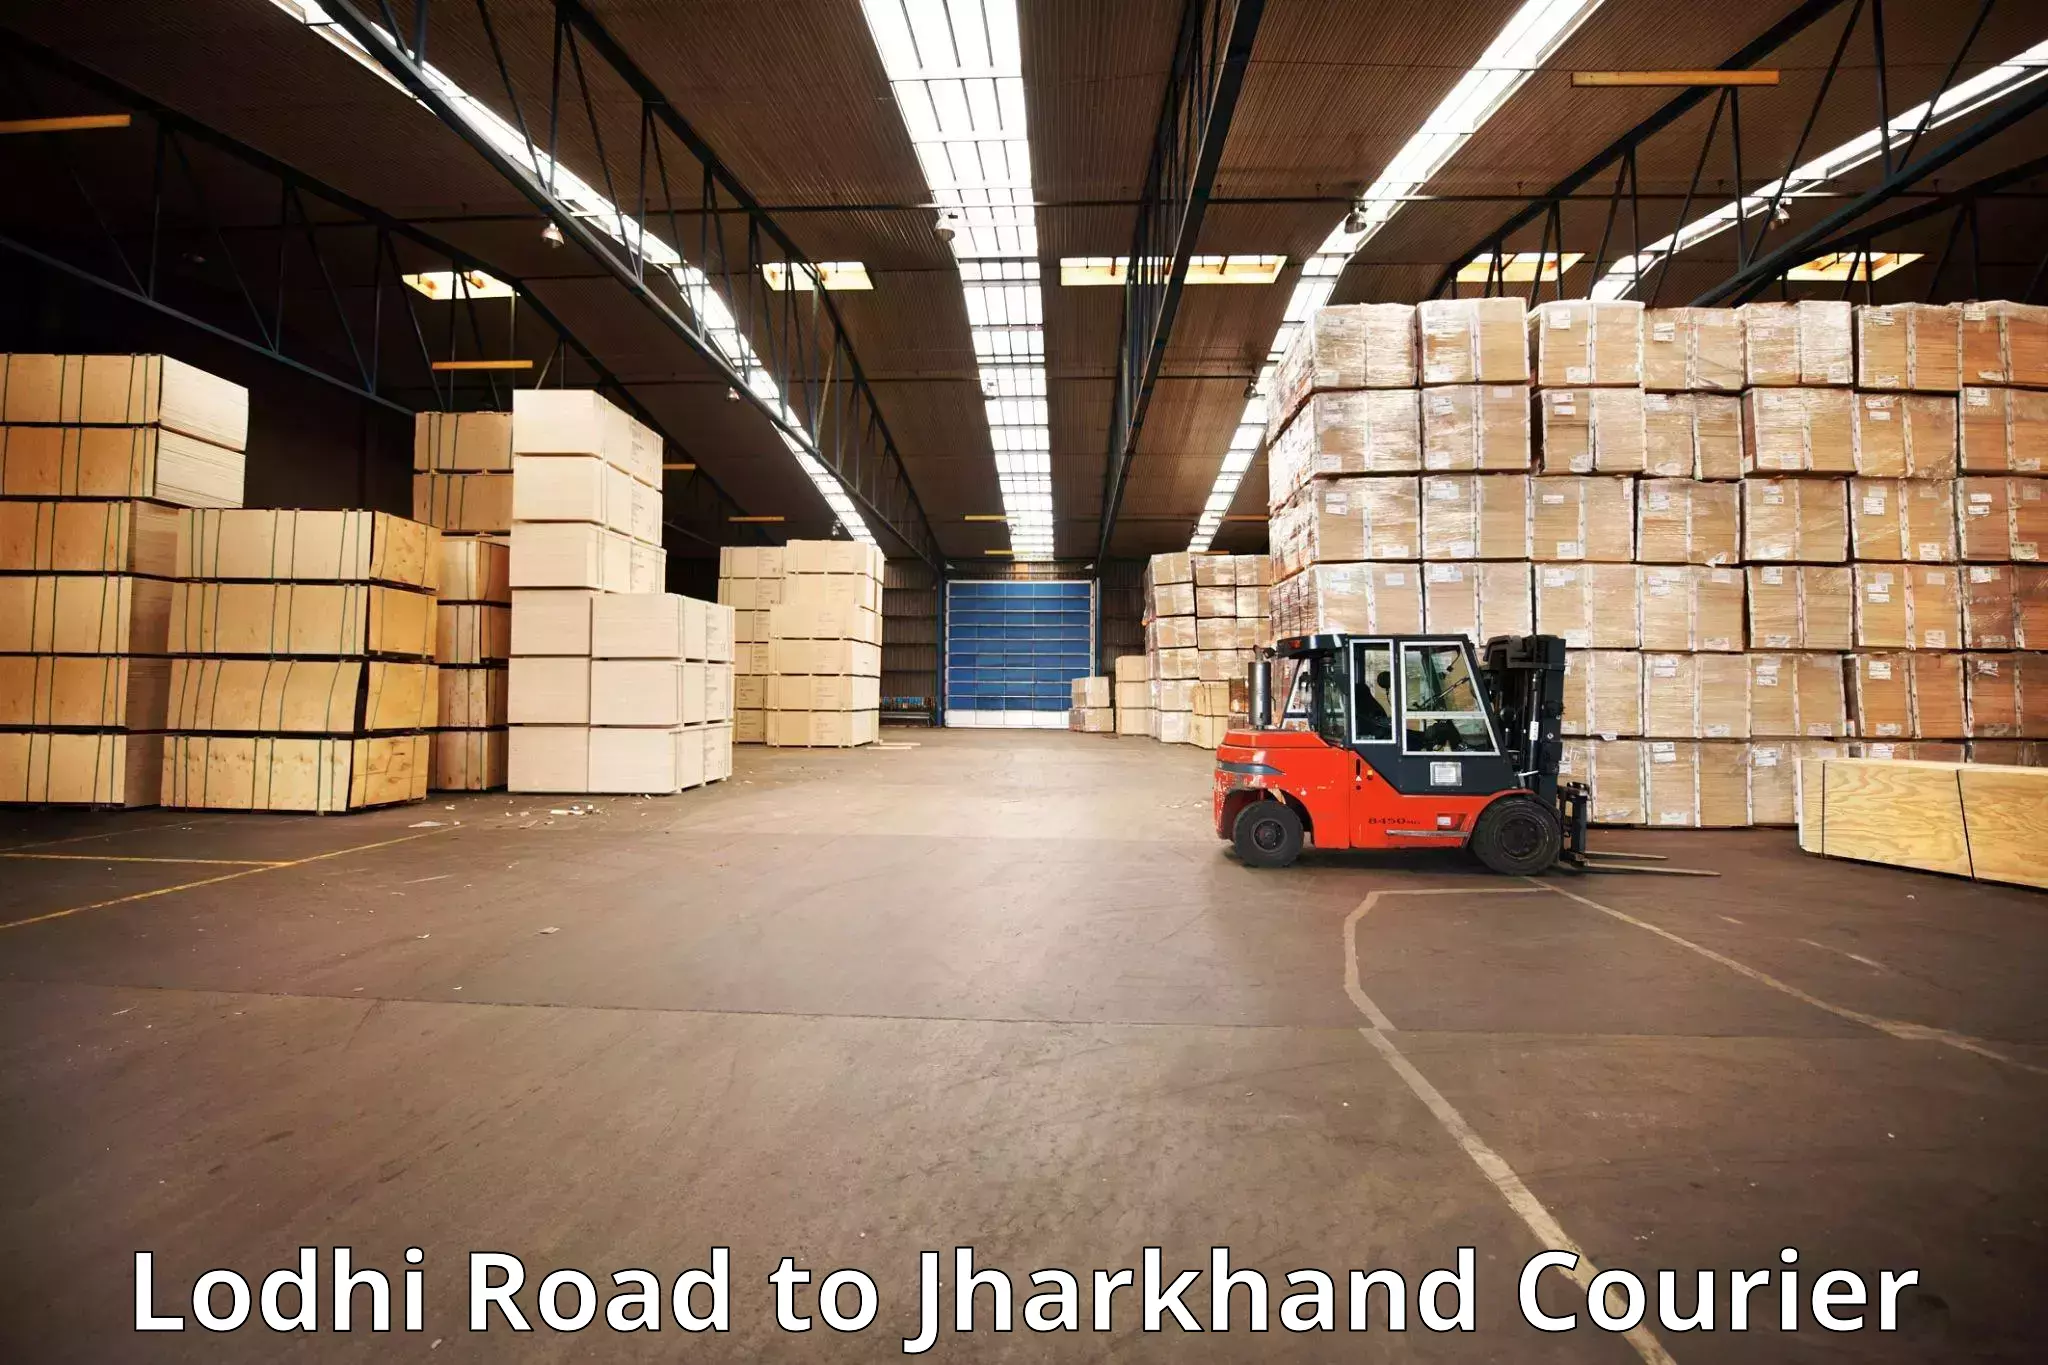 Luggage transport consulting Lodhi Road to Dhanbad